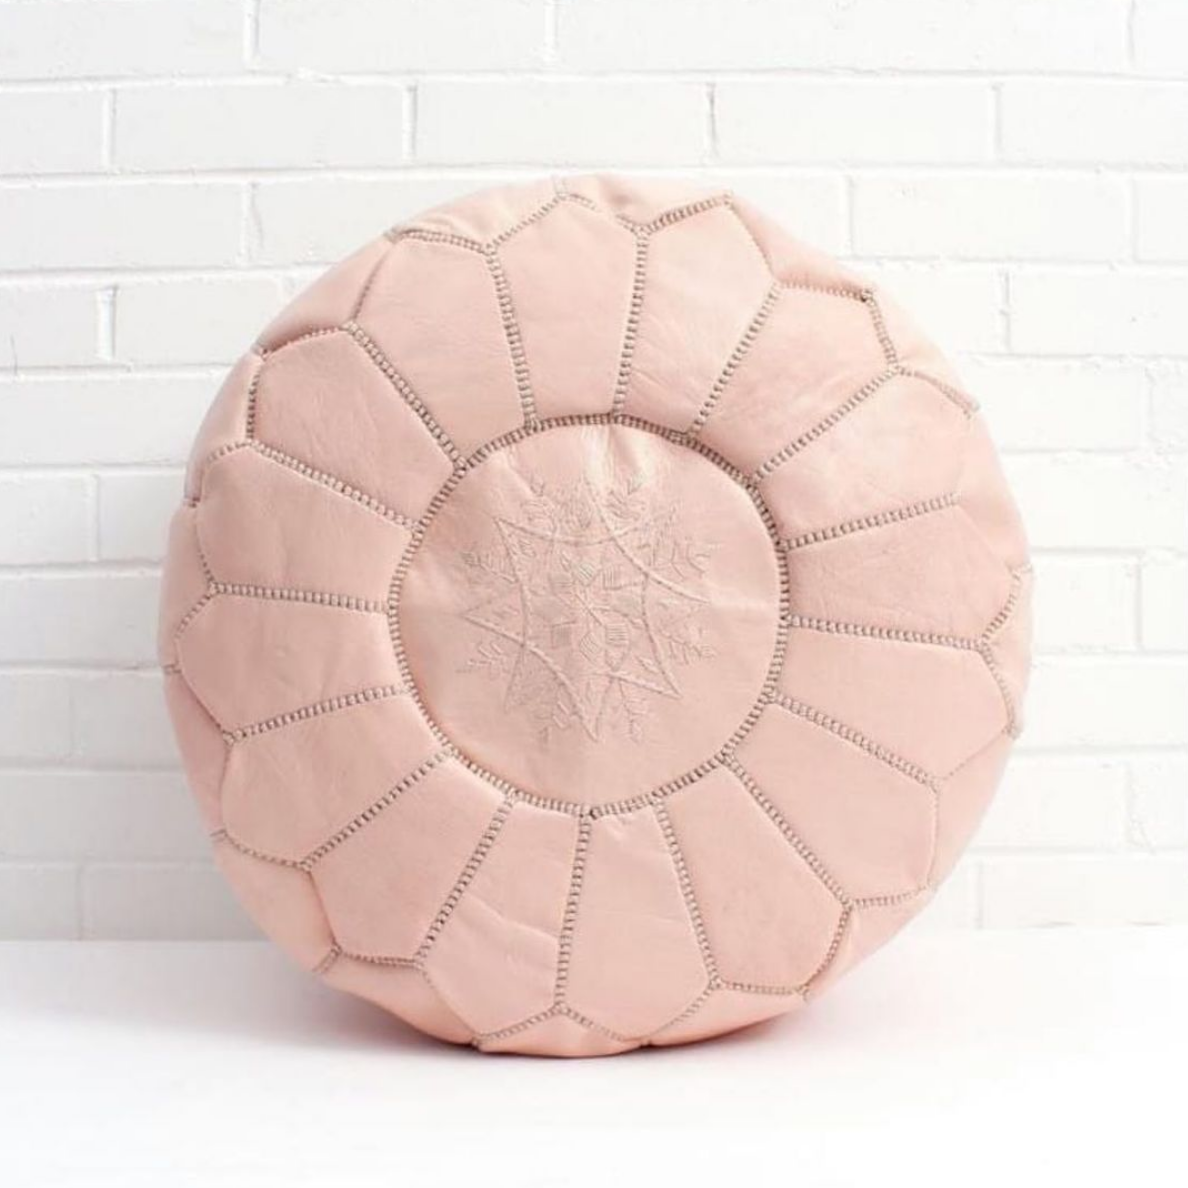 How to Fill A Moroccan Pouf 